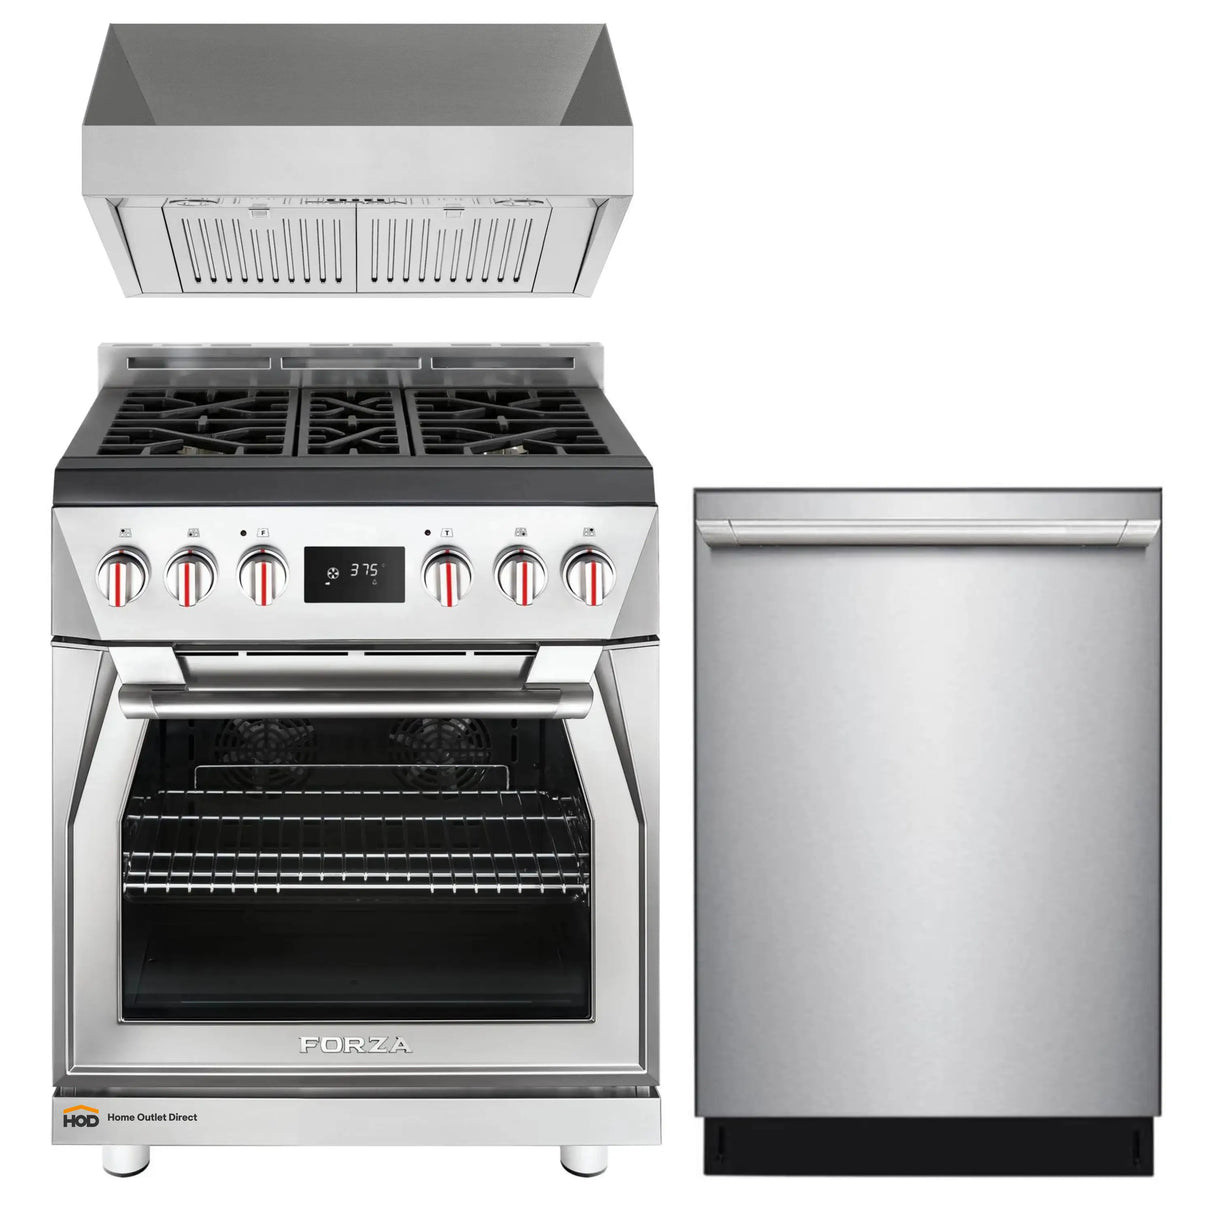 Forza 3-Piece Appliance Package - 30-Inch Dual Fuel Range, 18-Inch Pro-Style Under Cabinet Range Hood, & 24-Inch Dishwasher in Stainless Steel